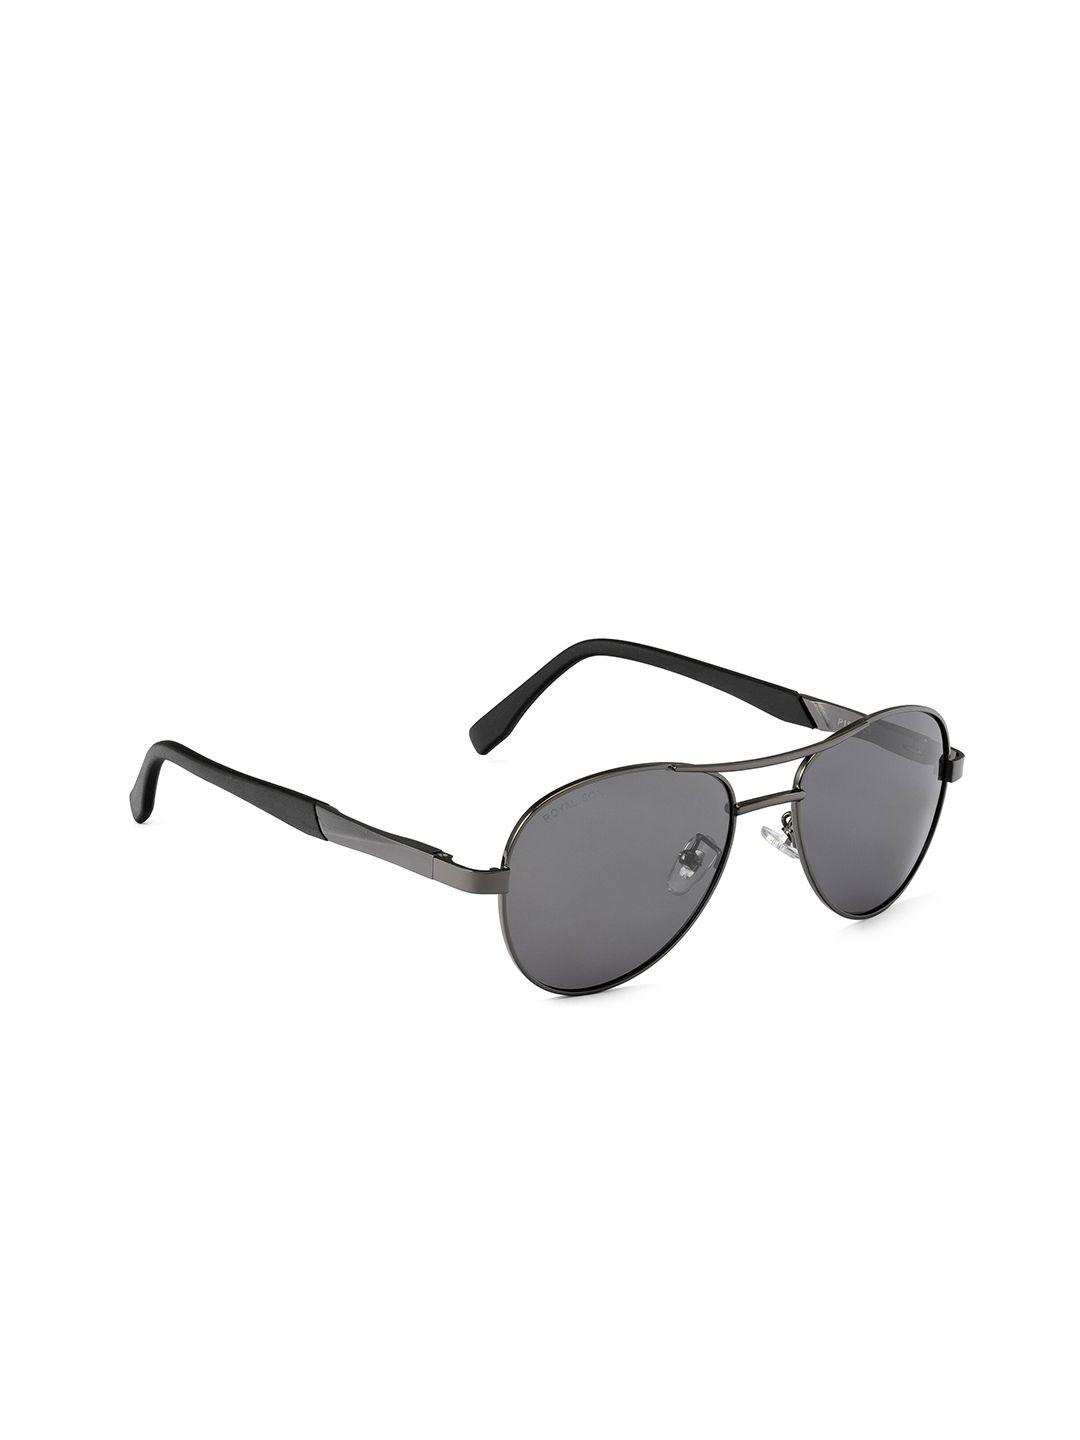 royal son aviator sunglasses with polarised and uv protected lens chi00129-c2